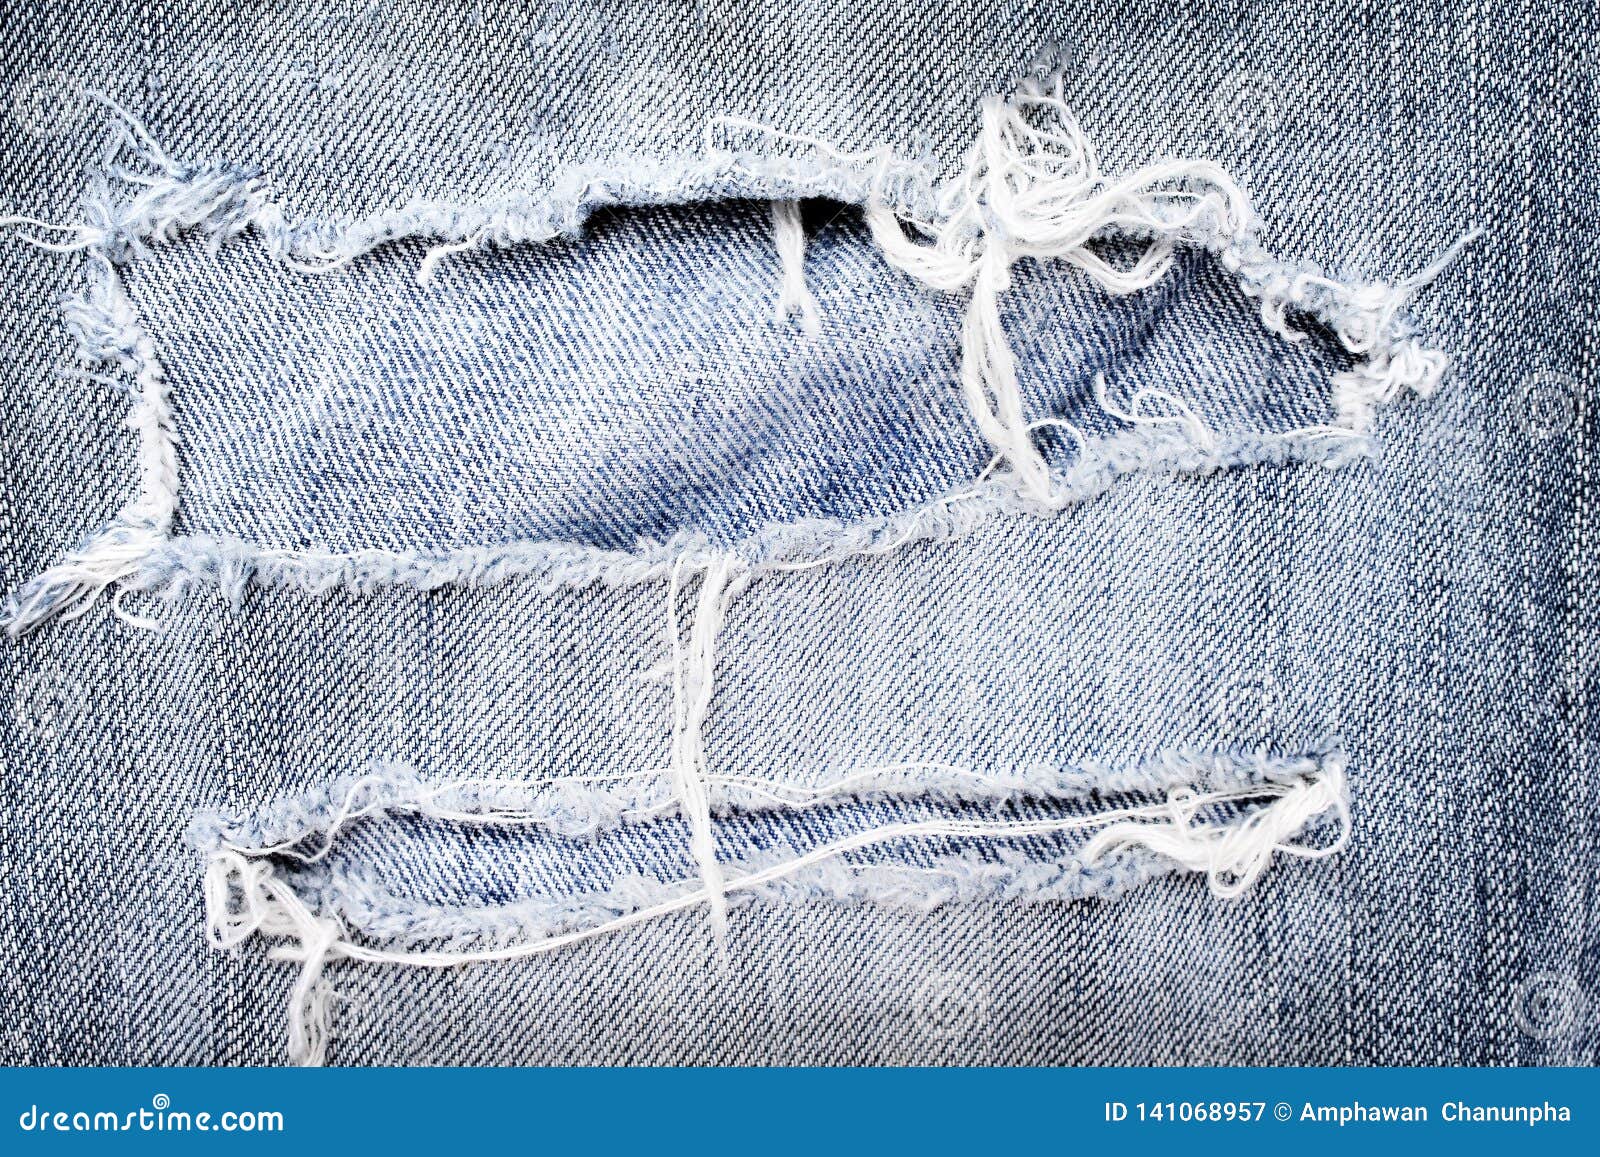 Old Blue Jeans with Ripped Texture , Hole and White Threads Destroyed ...